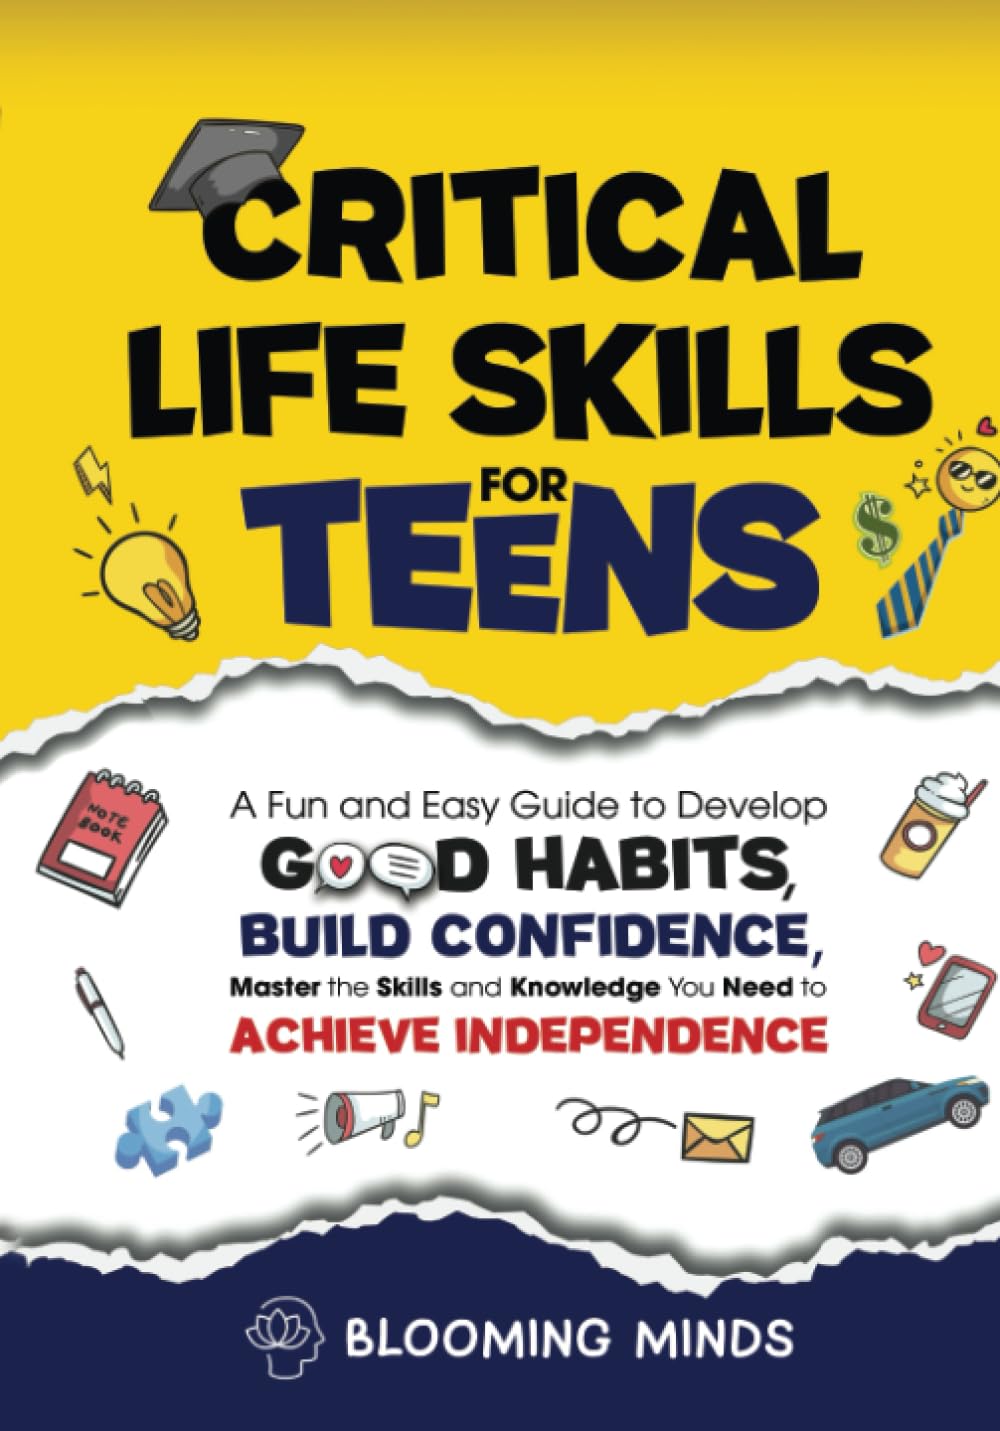 Critical Life Skills for Teens: A Fun and Easy Guide to Develop Good Habits, Build Confidence, Master the Skills and Knowledge You Need to Achieve ... Development and Wellness Books for Teens)